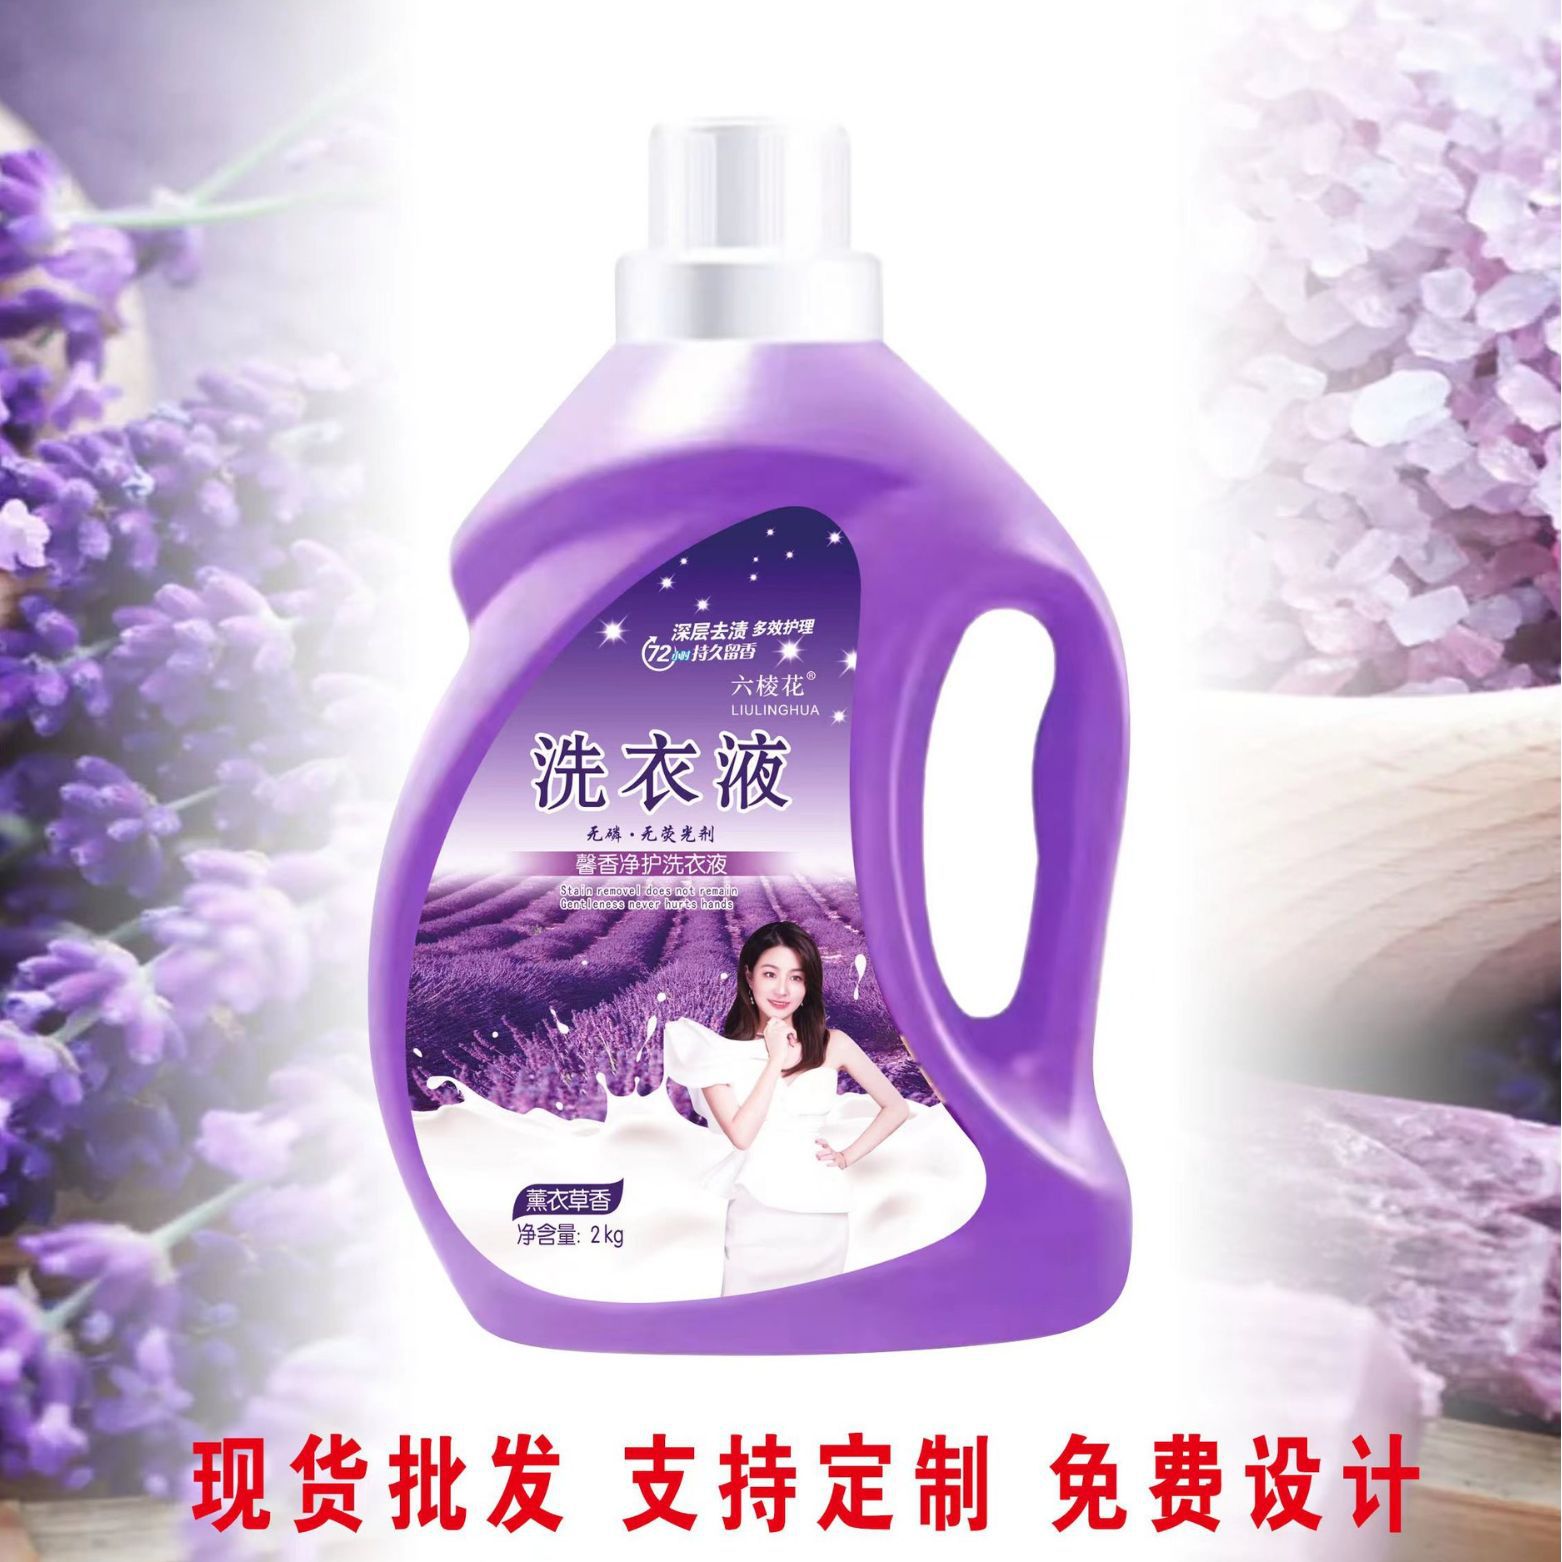 Soda Laundry Detergent Wholesale 2kg Personal Care Product Welfare Activity Gift Lavender Laundry Detergent Wholesale Factory